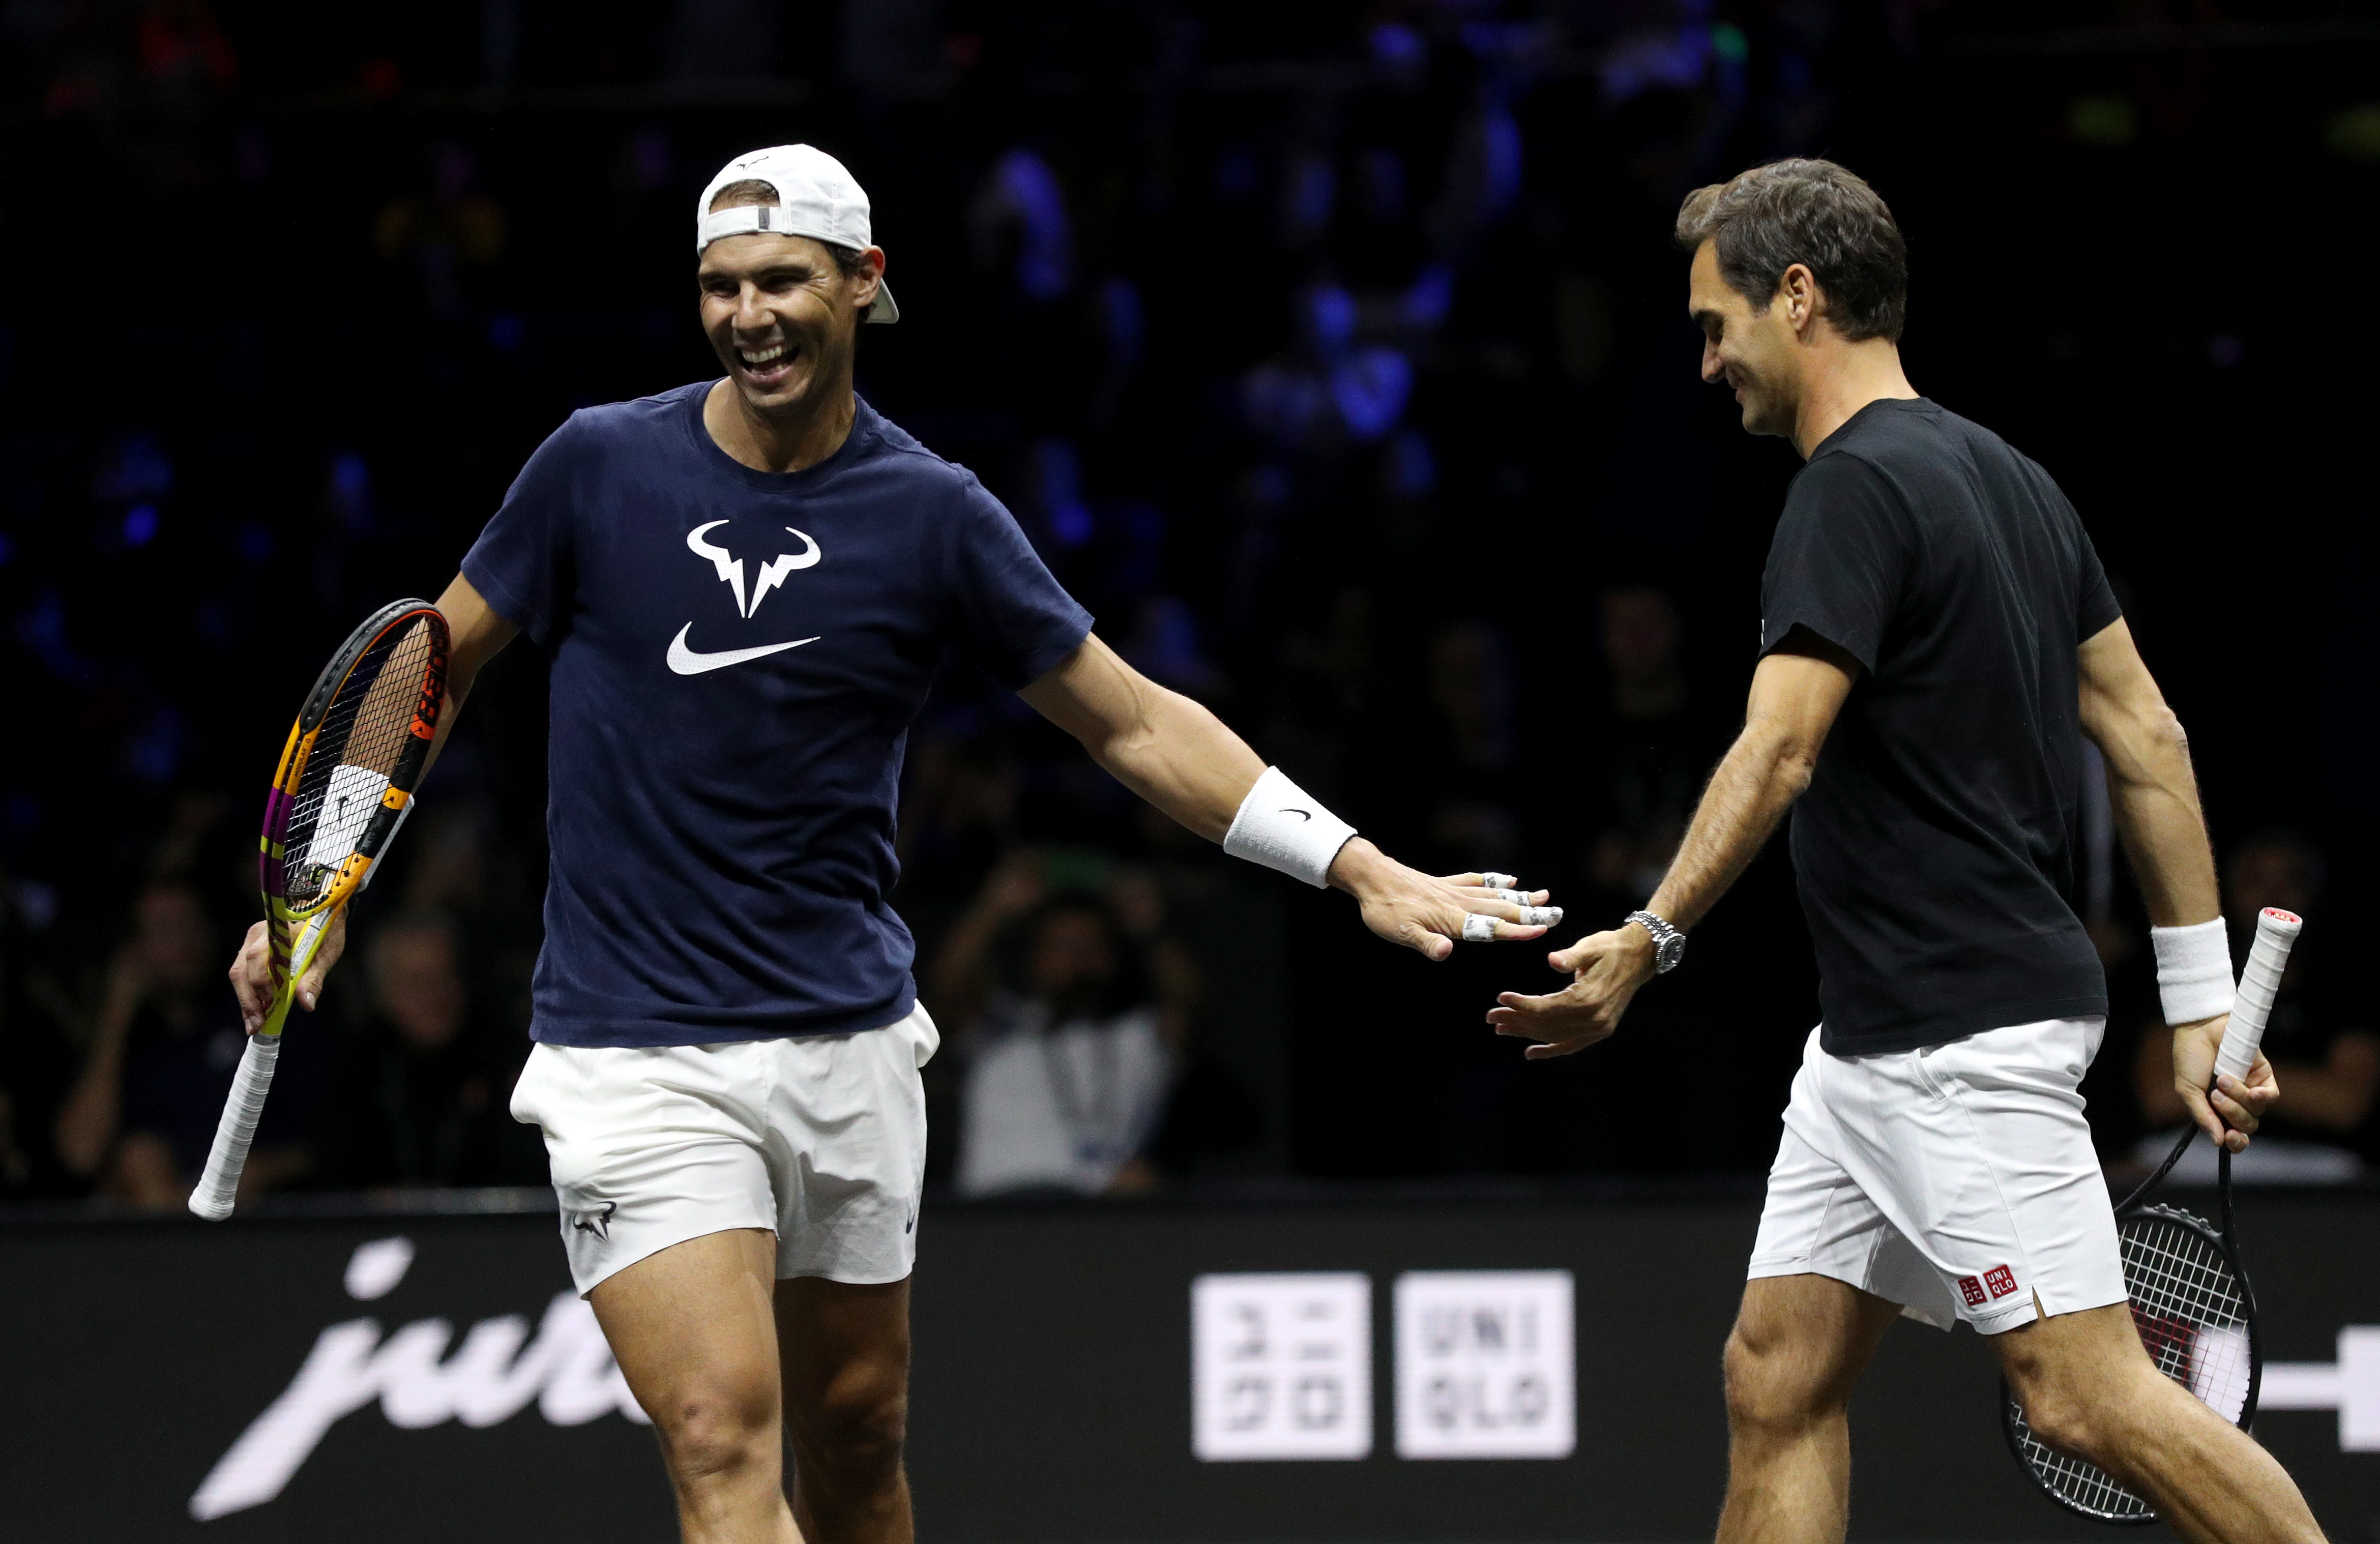 Fedal reunion confirmed! Roger Federer to get "special moment" in final